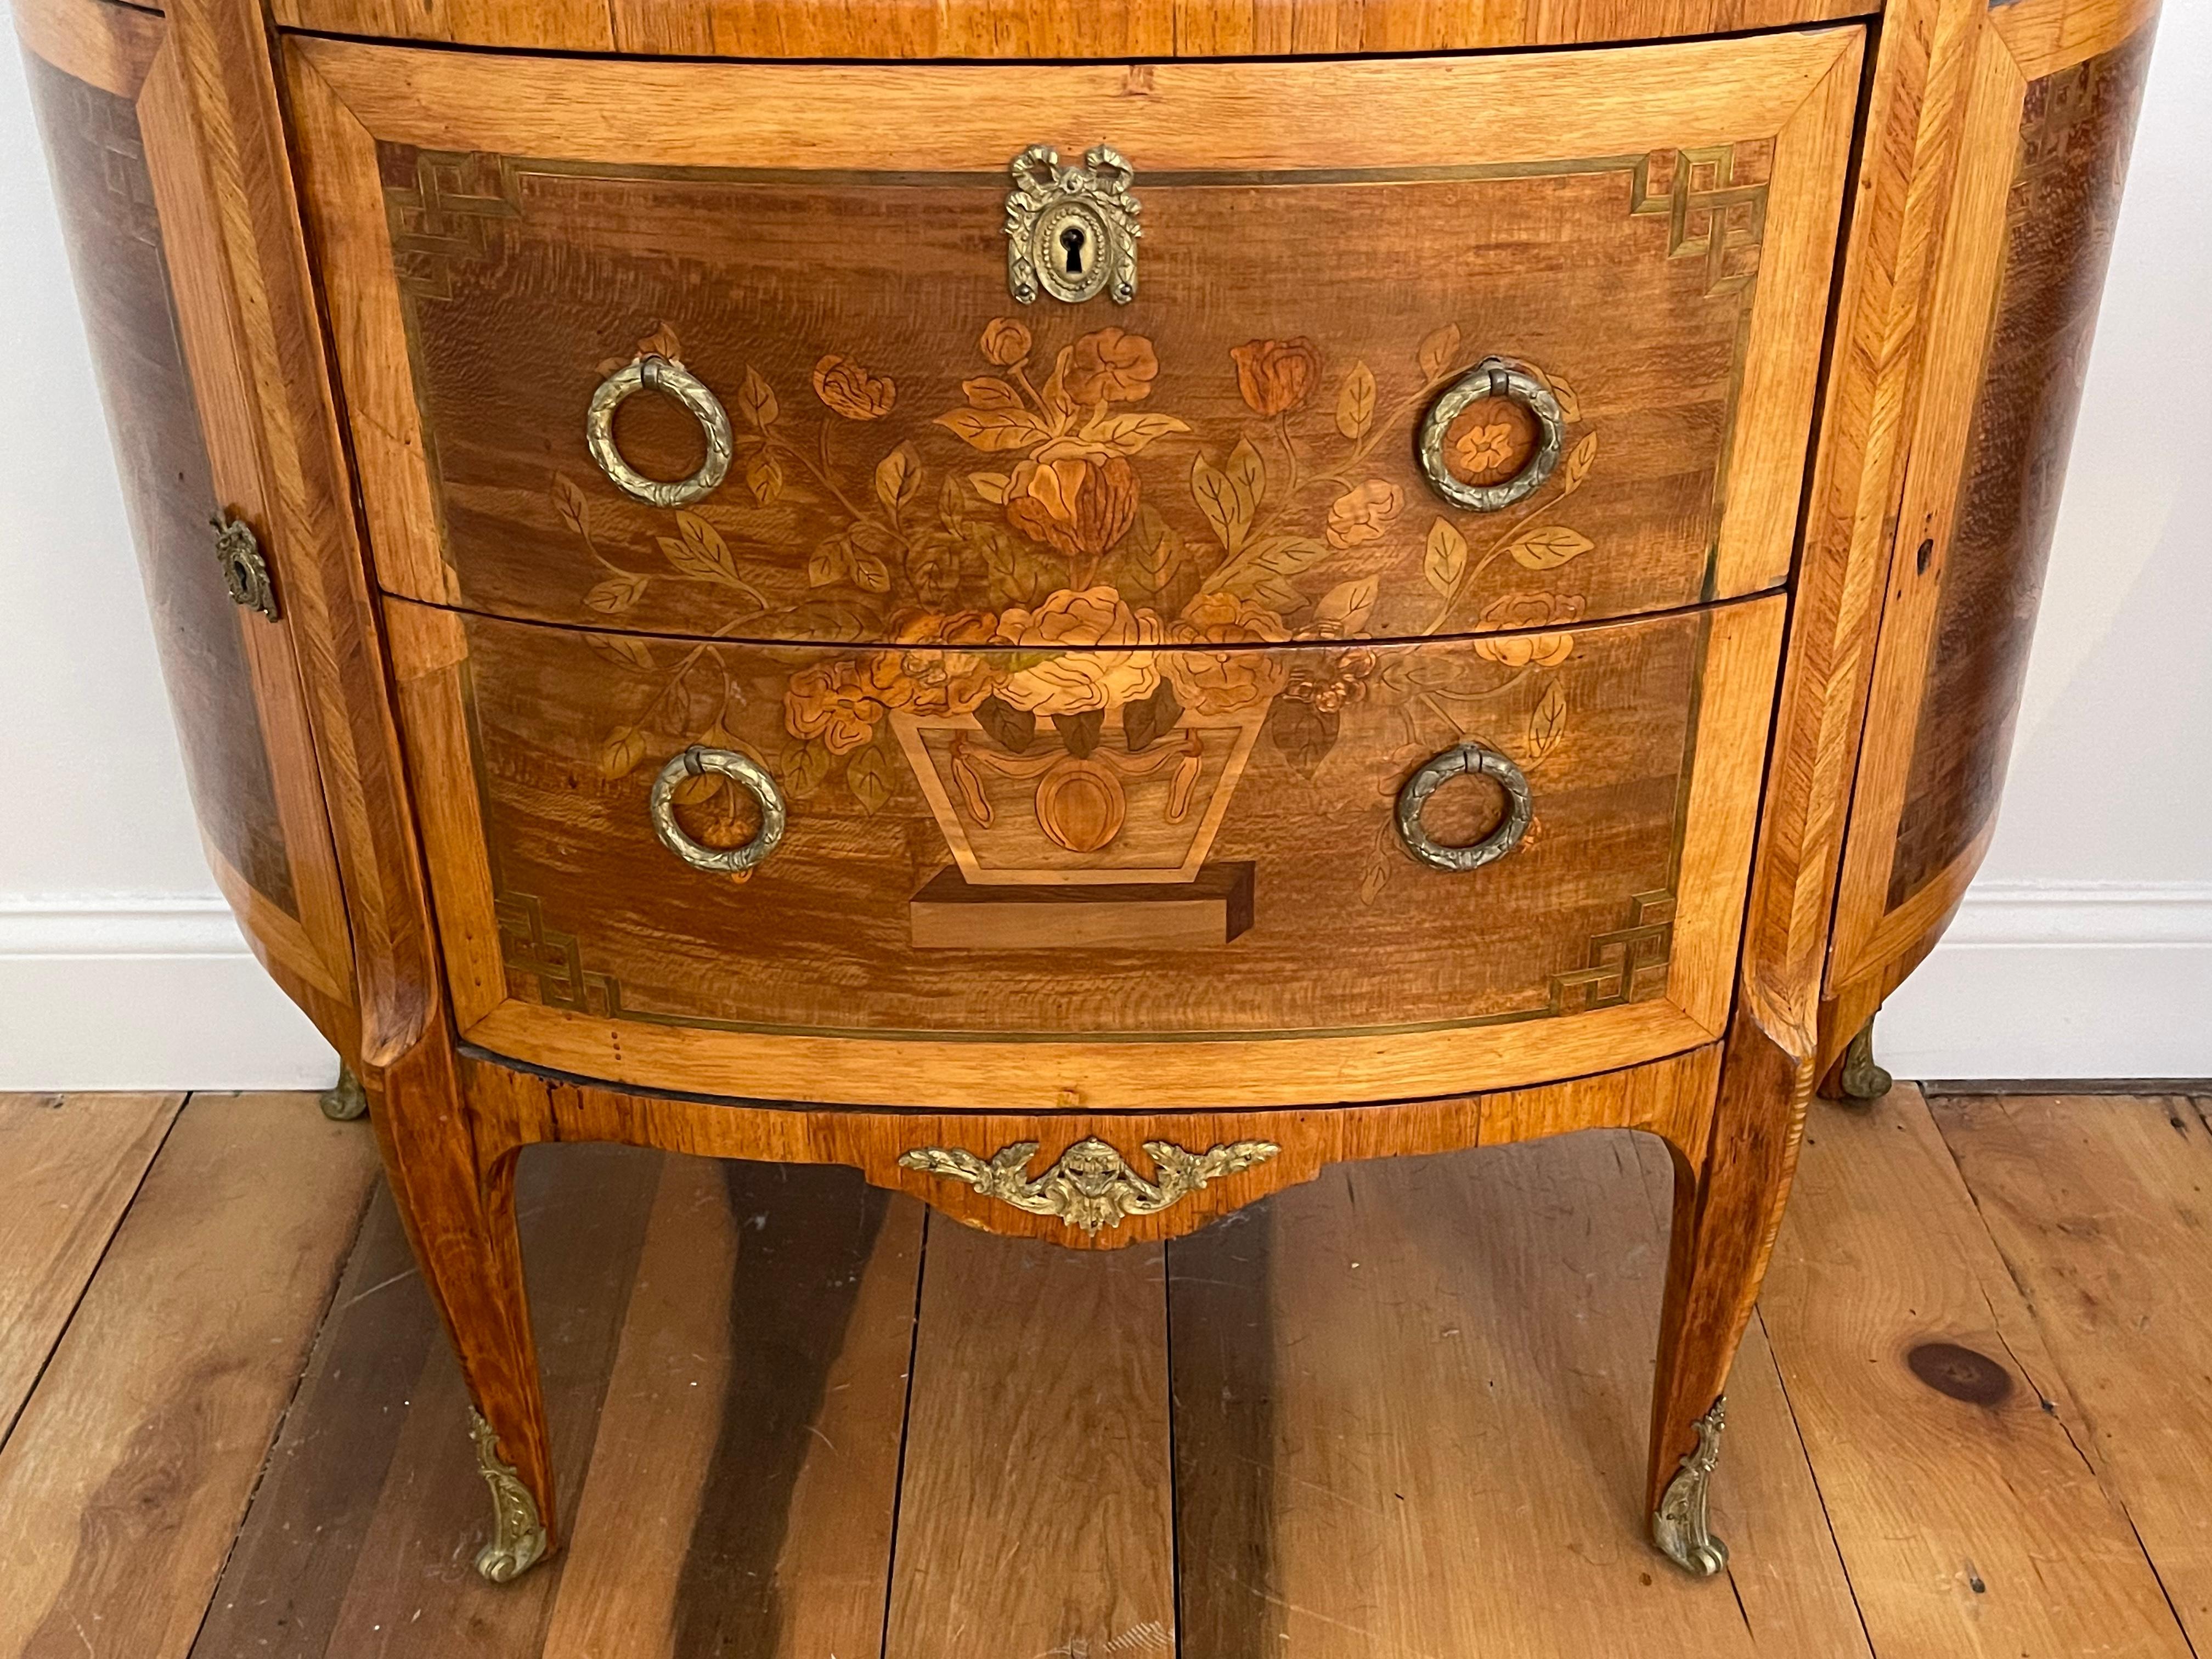 Pair of Continental Kingwood Marquetry Demilune commodes with marble tops. Beautifully inlaid with boxwood, tulipwood in neoclassical design. Original marble tops.